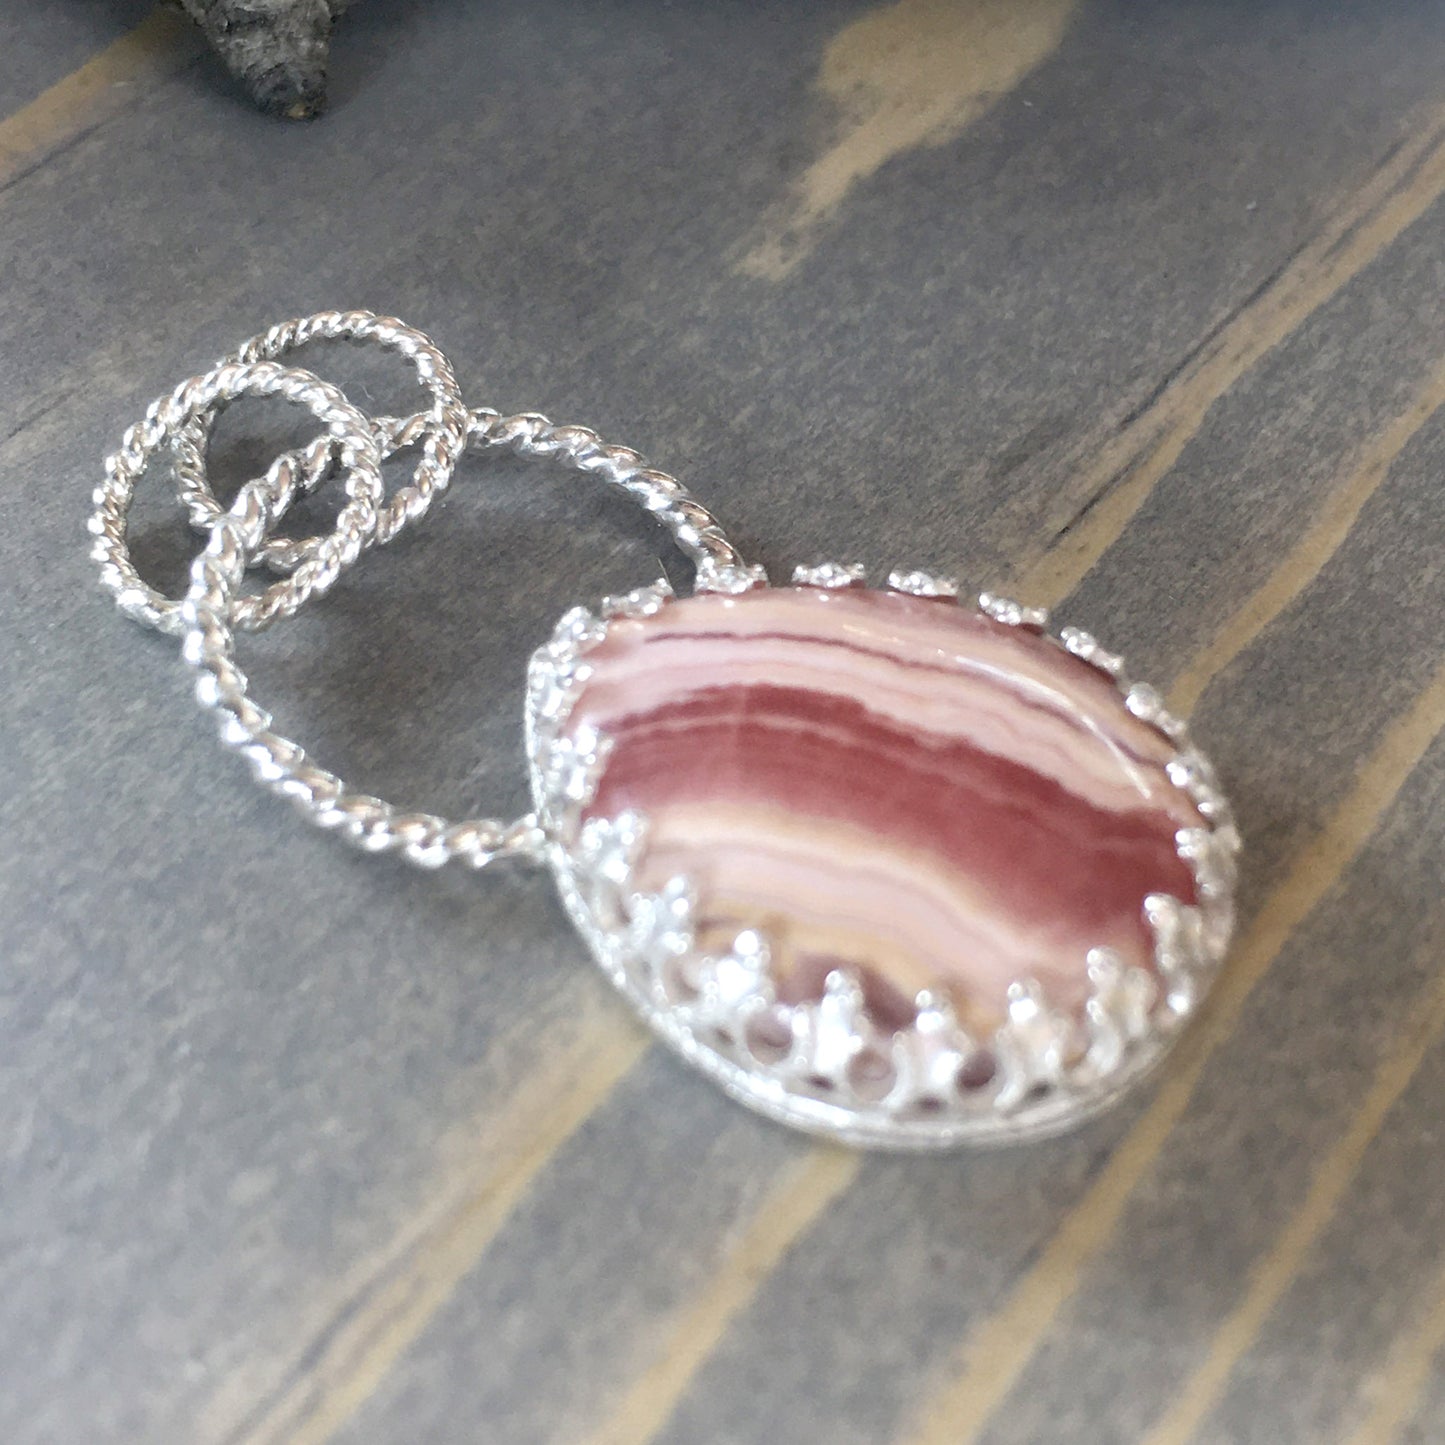 Rhodochrosite Pendant Front View II - Stone Treasures by the Lake